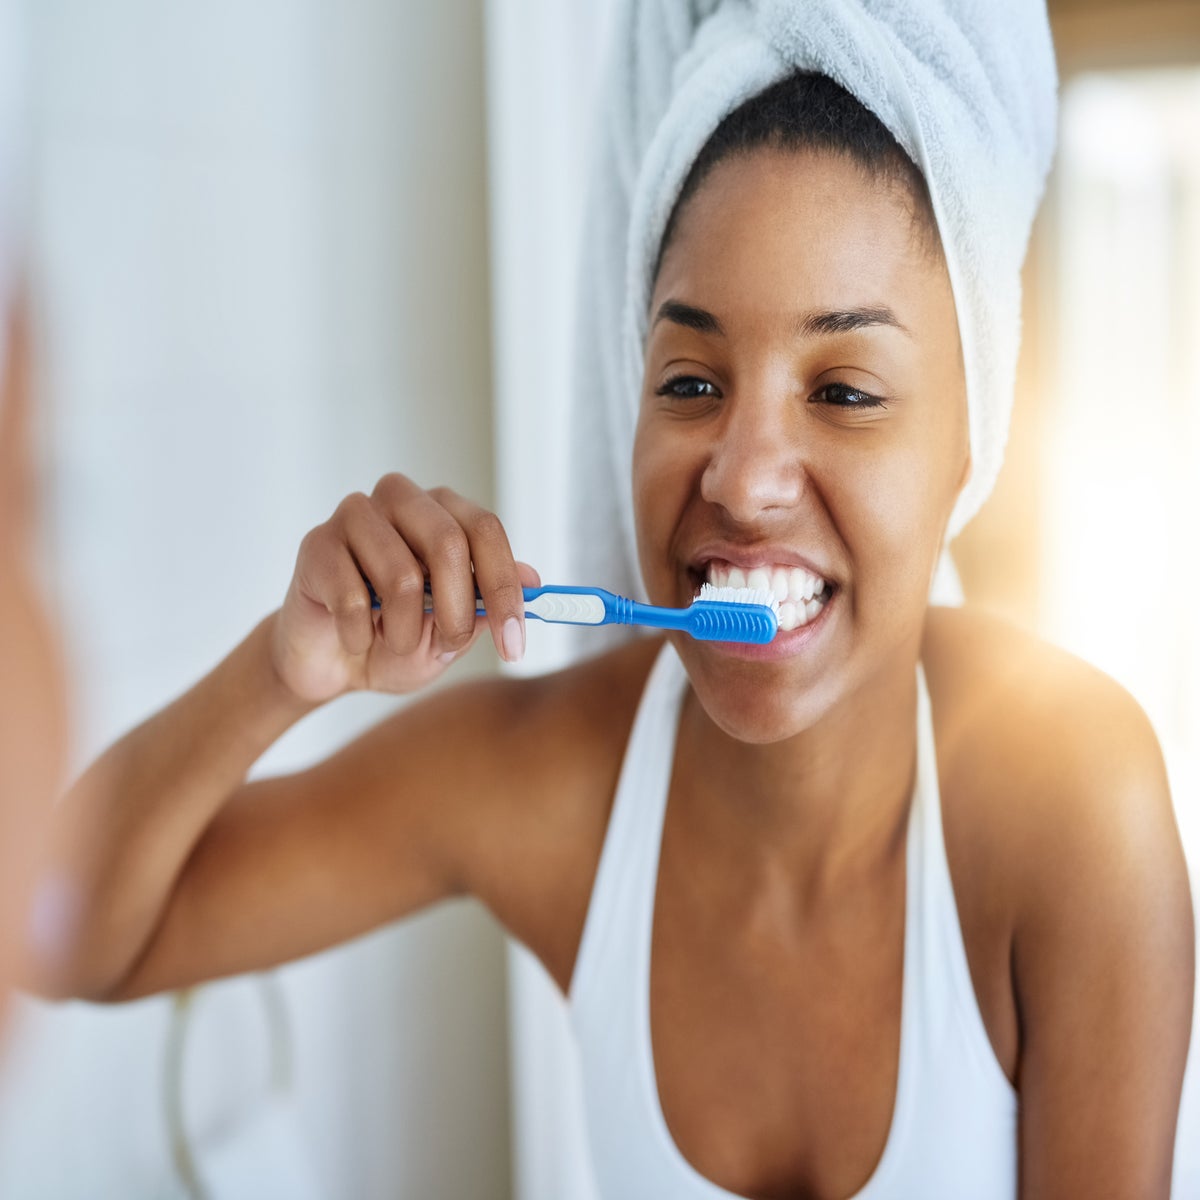 Not brushing your teeth enough can cause heart disease, diabetes